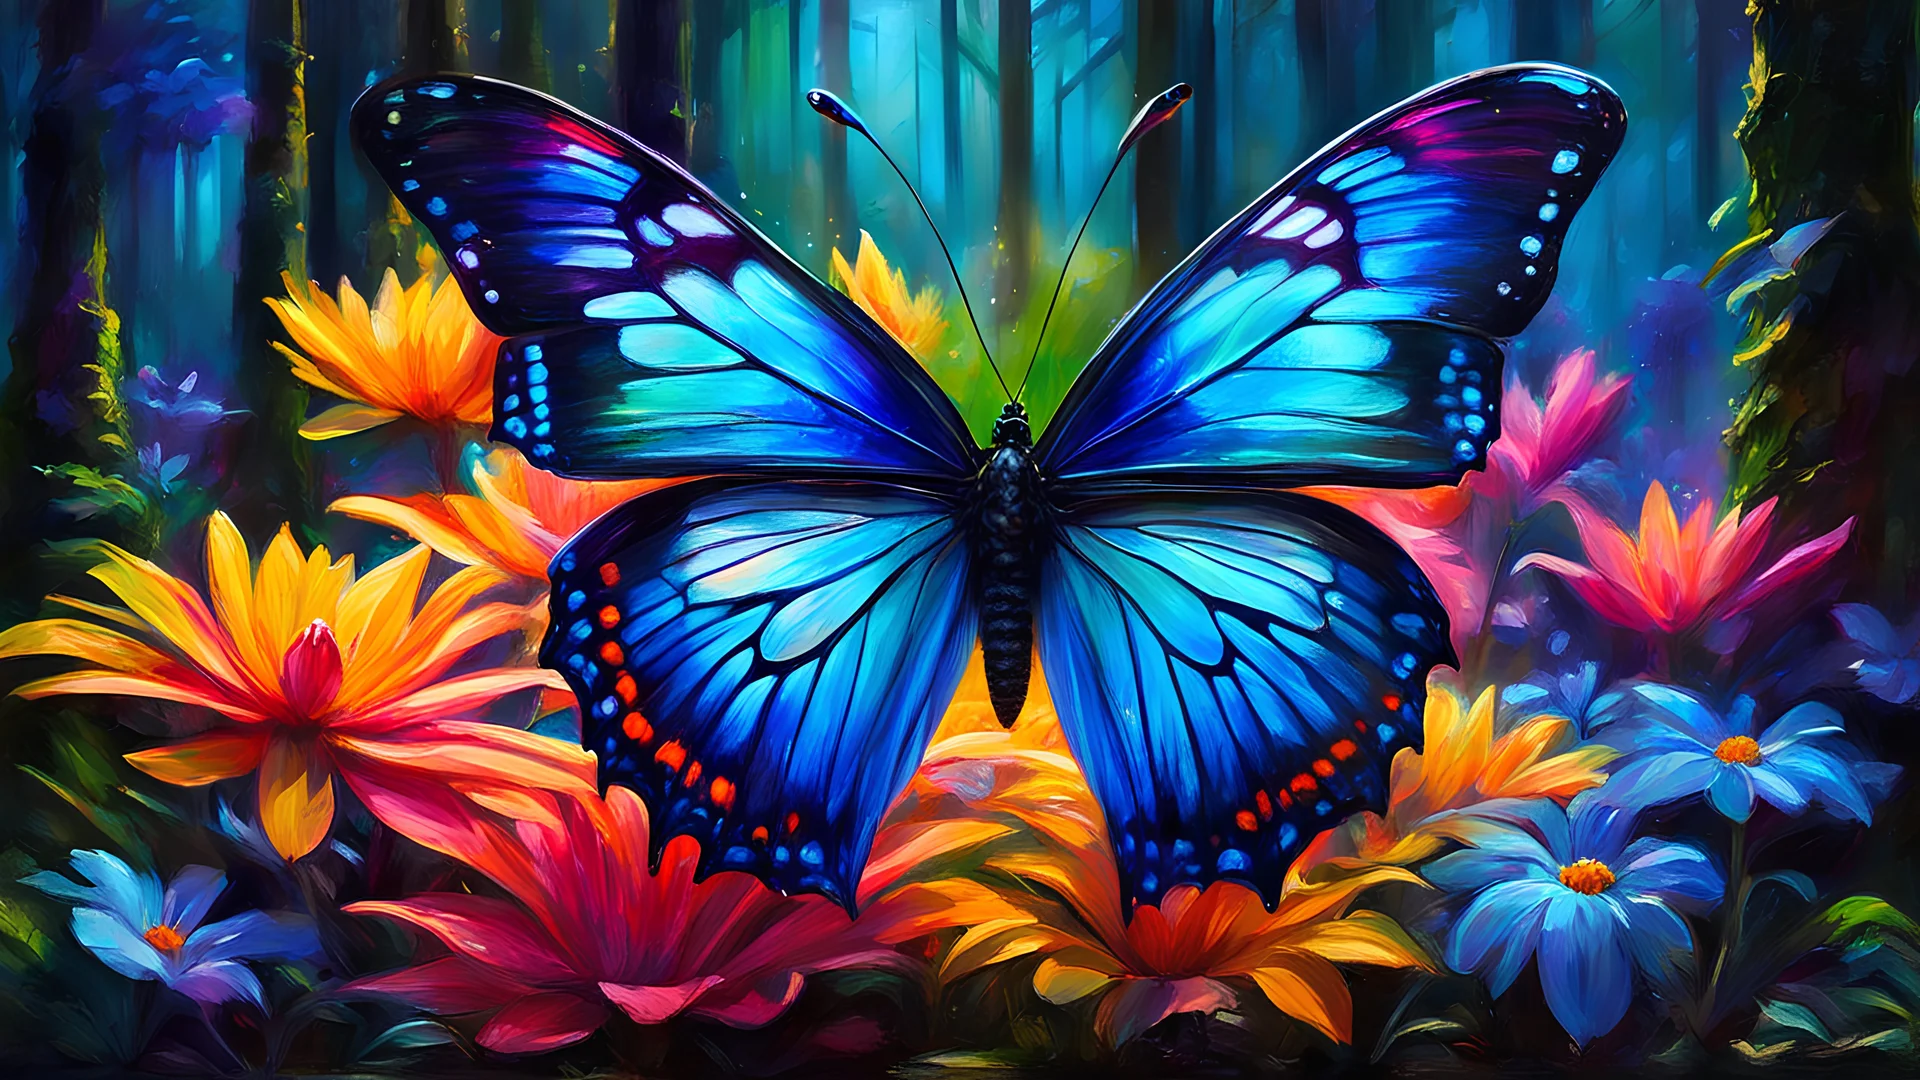 acrylic illustration, acrylic paint, oily sketch, glass butterfly, on neon flower in enchanted forest, ultra detailed, realistic, ral-dissolve, vivid colors, volumetric lighting, by [Iryna Yermolova | Conor Harrington]